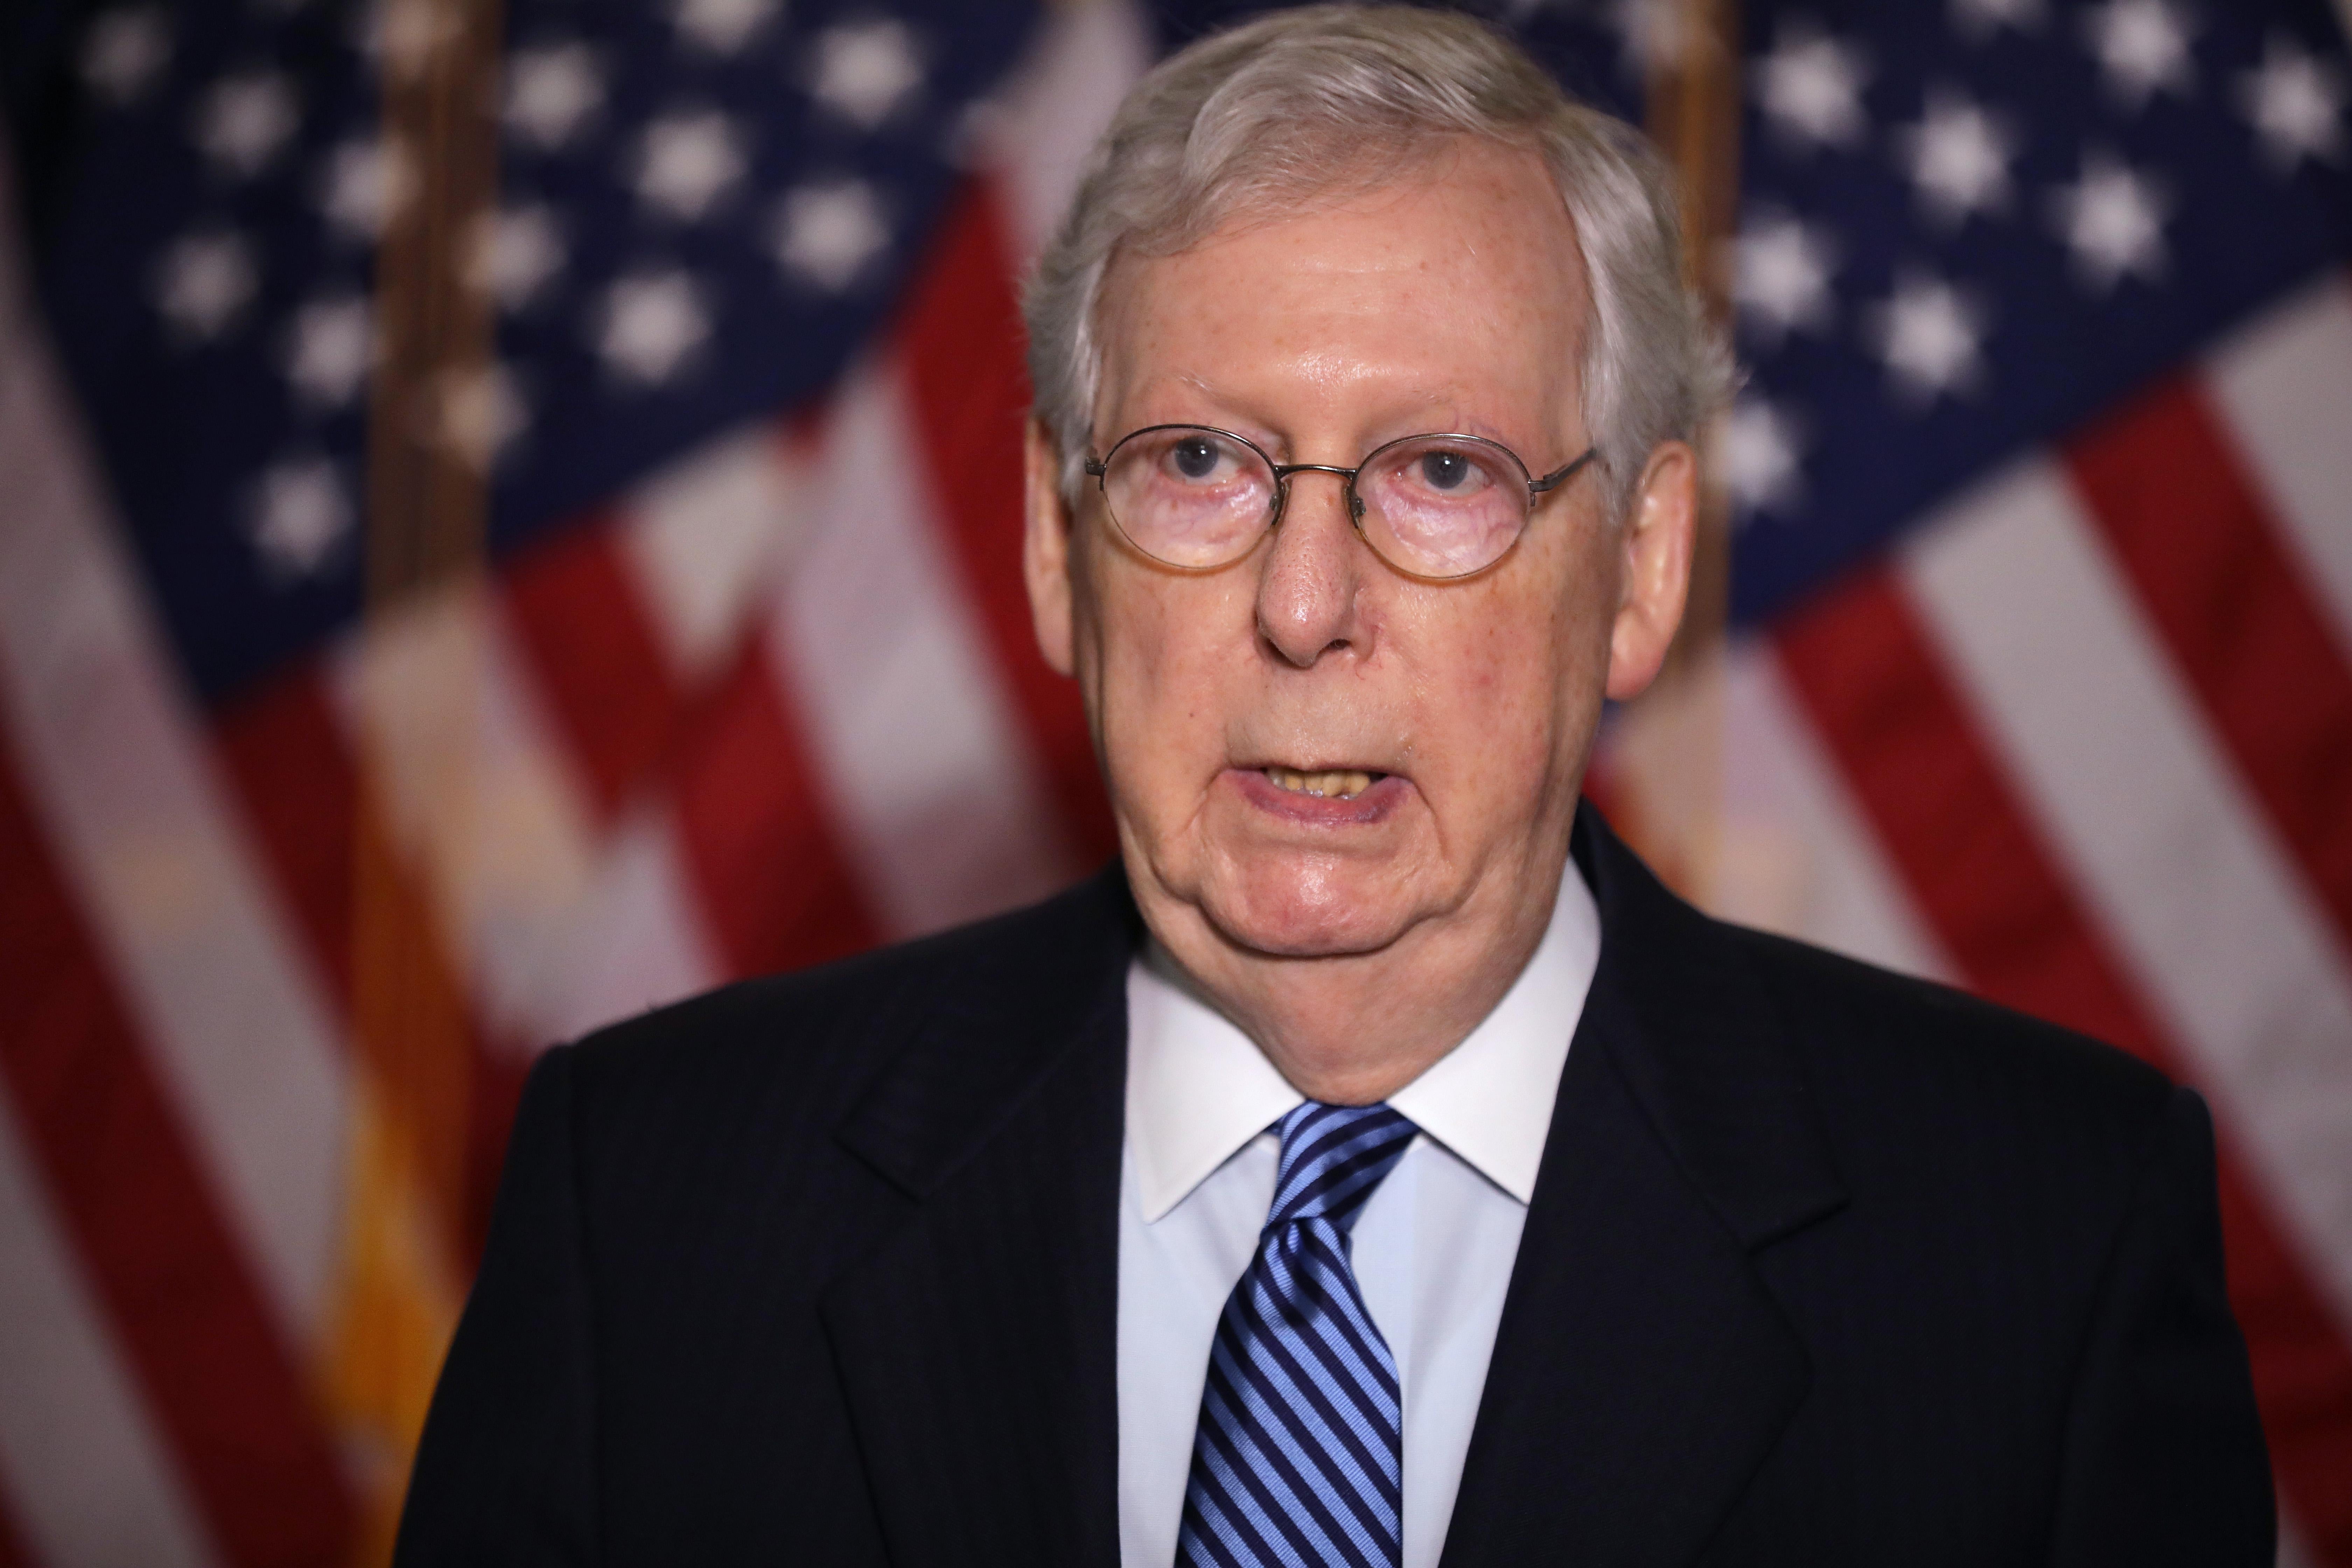 Mitch McConnell in front of an American flag.